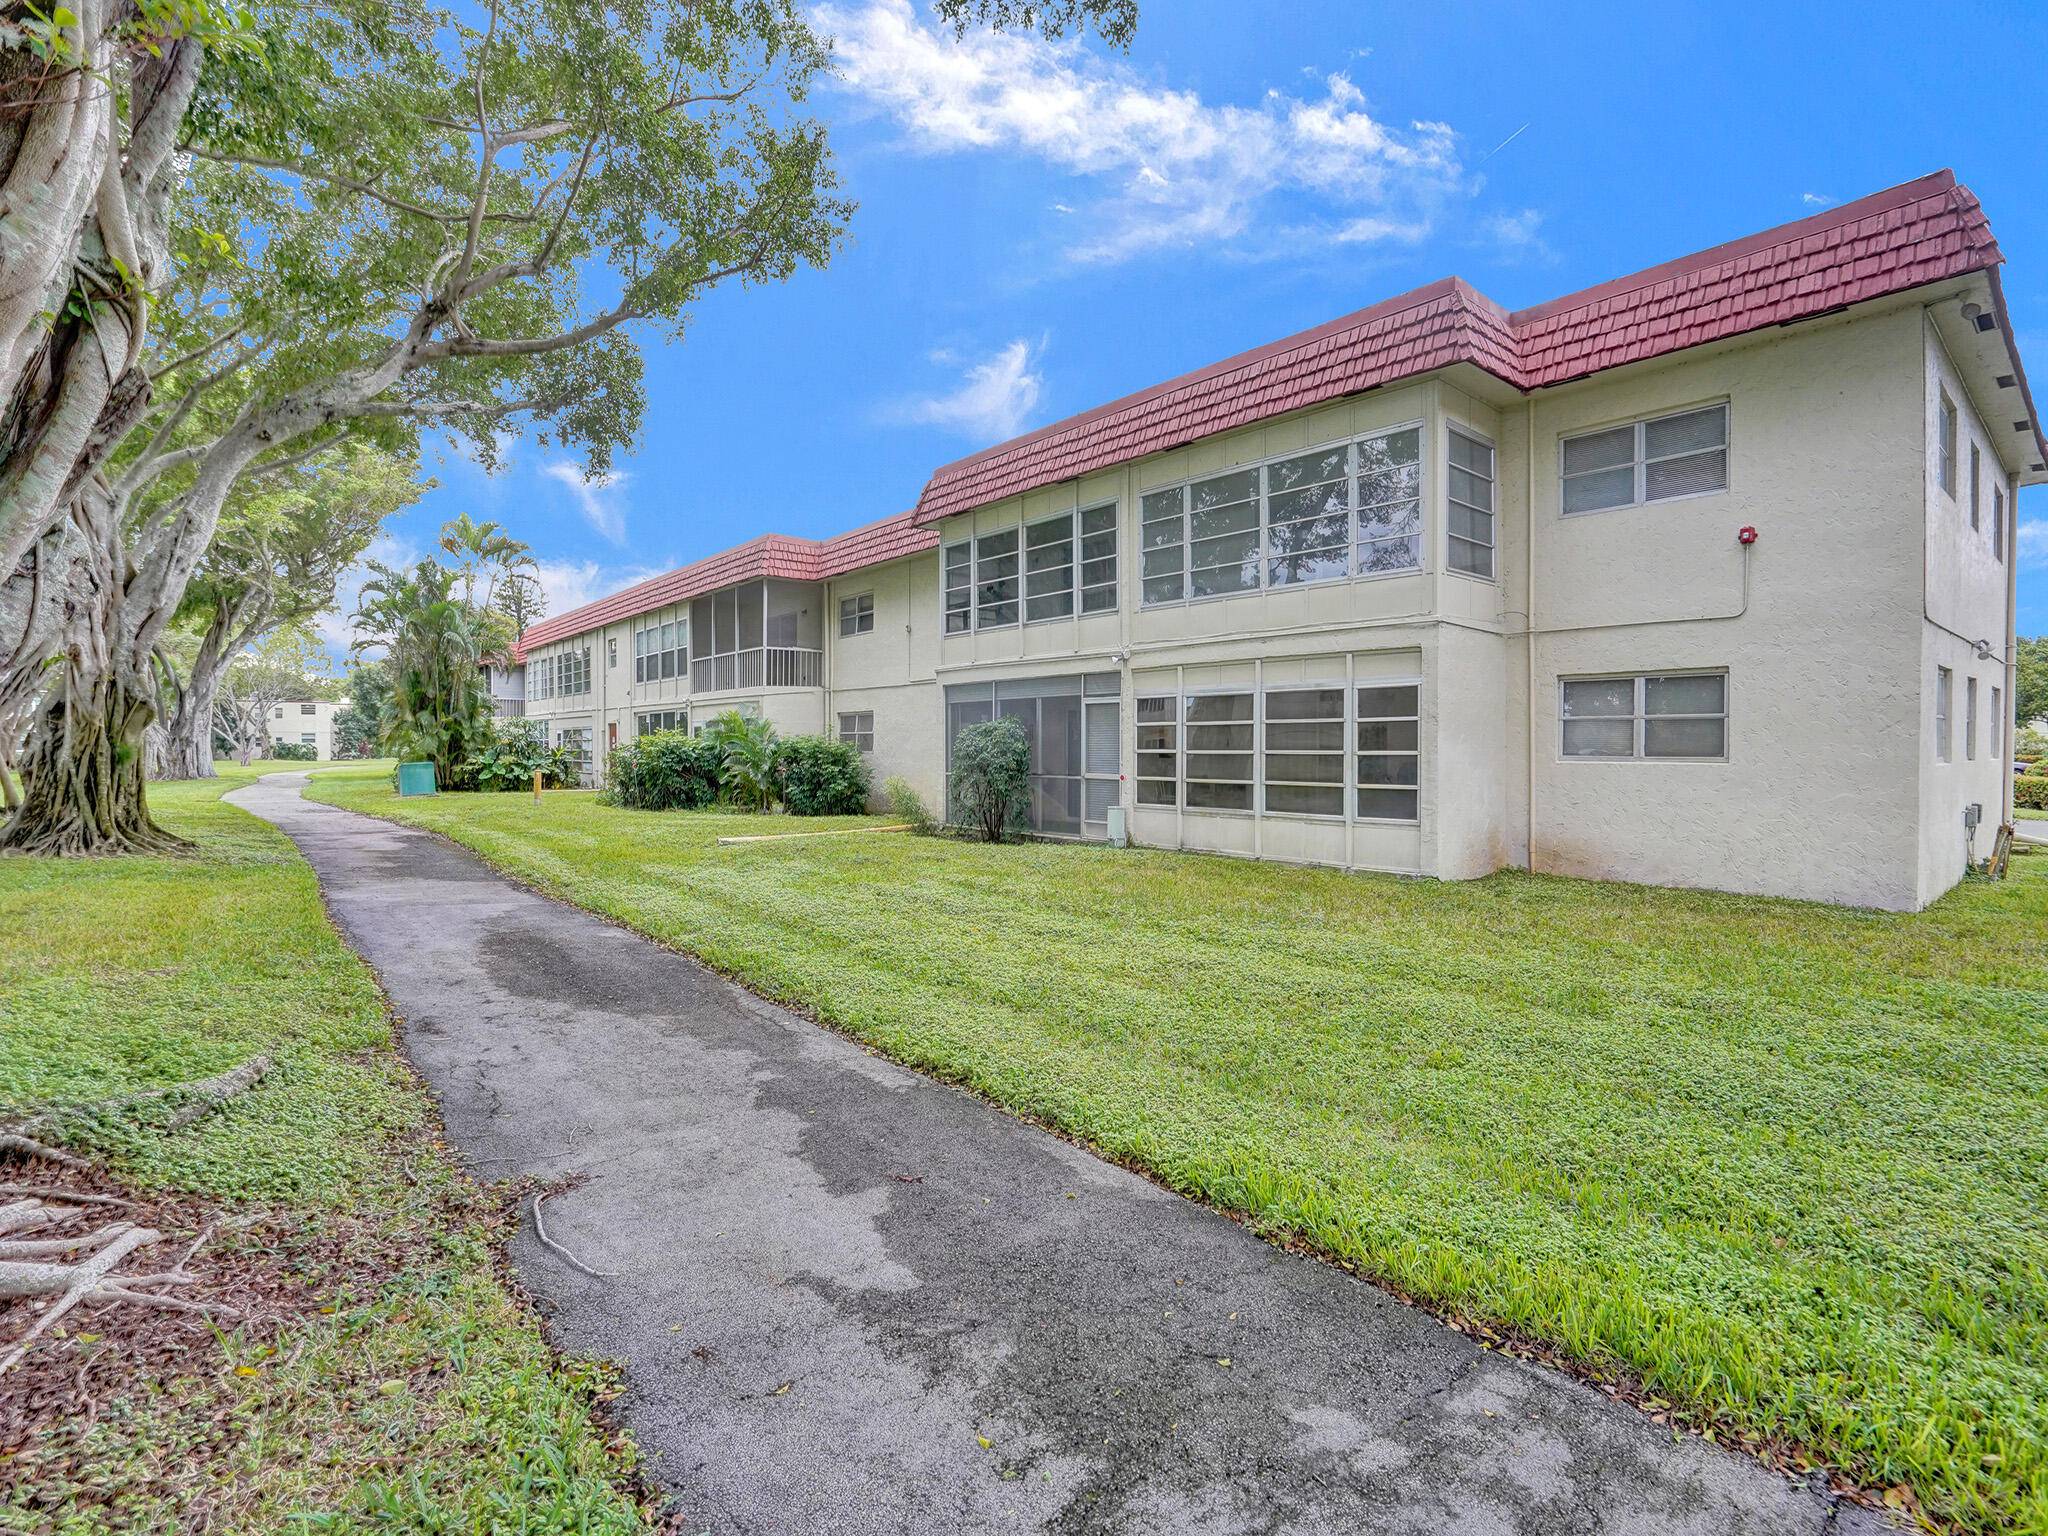 Enjoy peaceful living here at this 2 bedroom 2 bath condo with 925sq ft in a quiet 55 community !